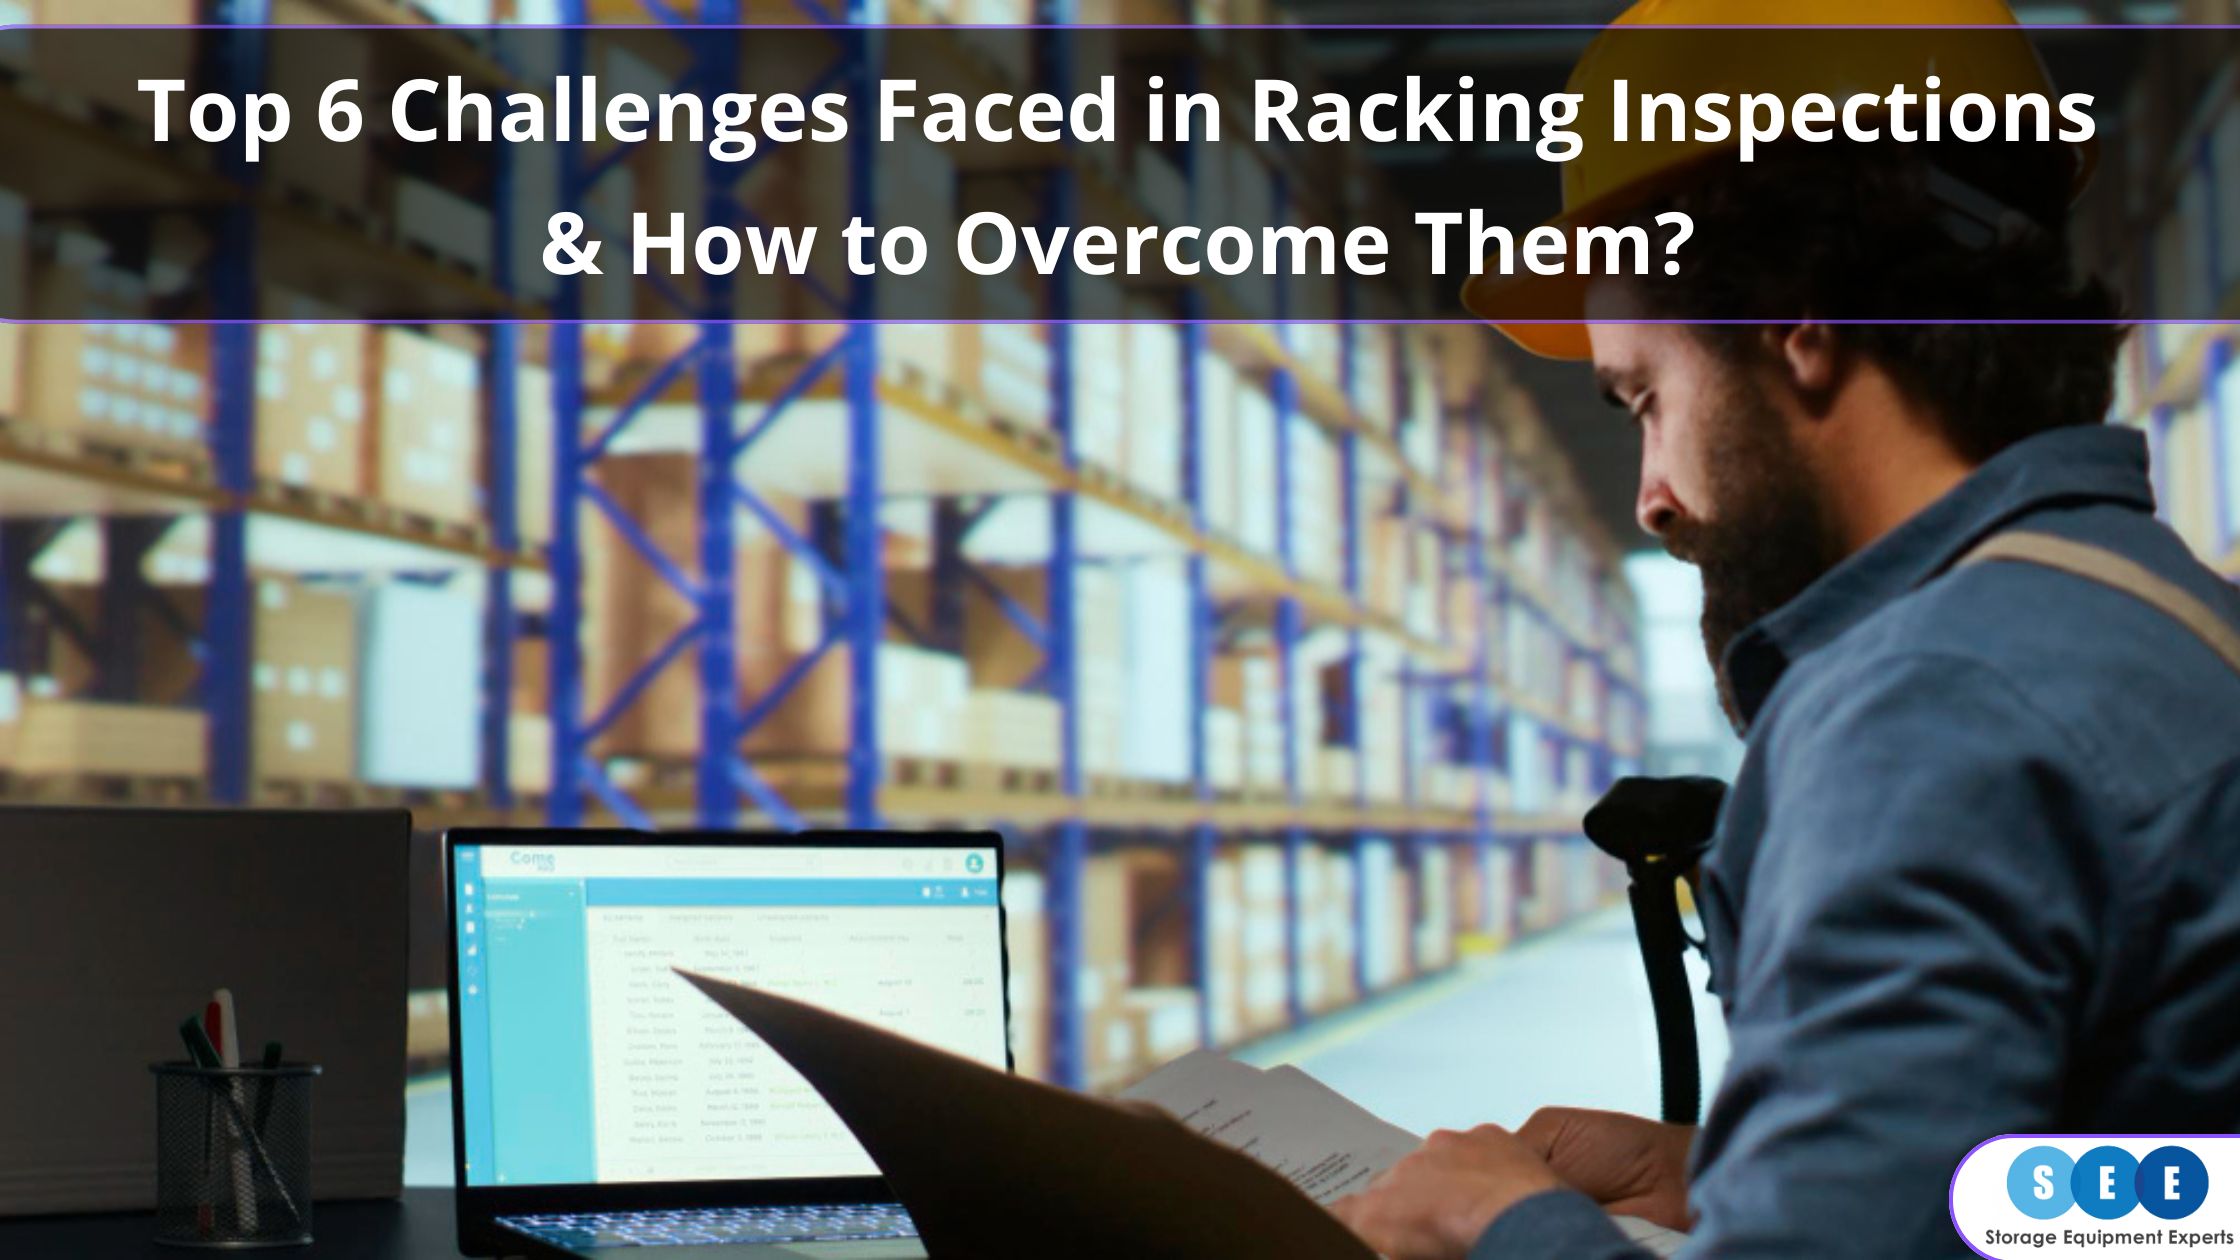 Top 6 Challenges Faced in Racking Inspections